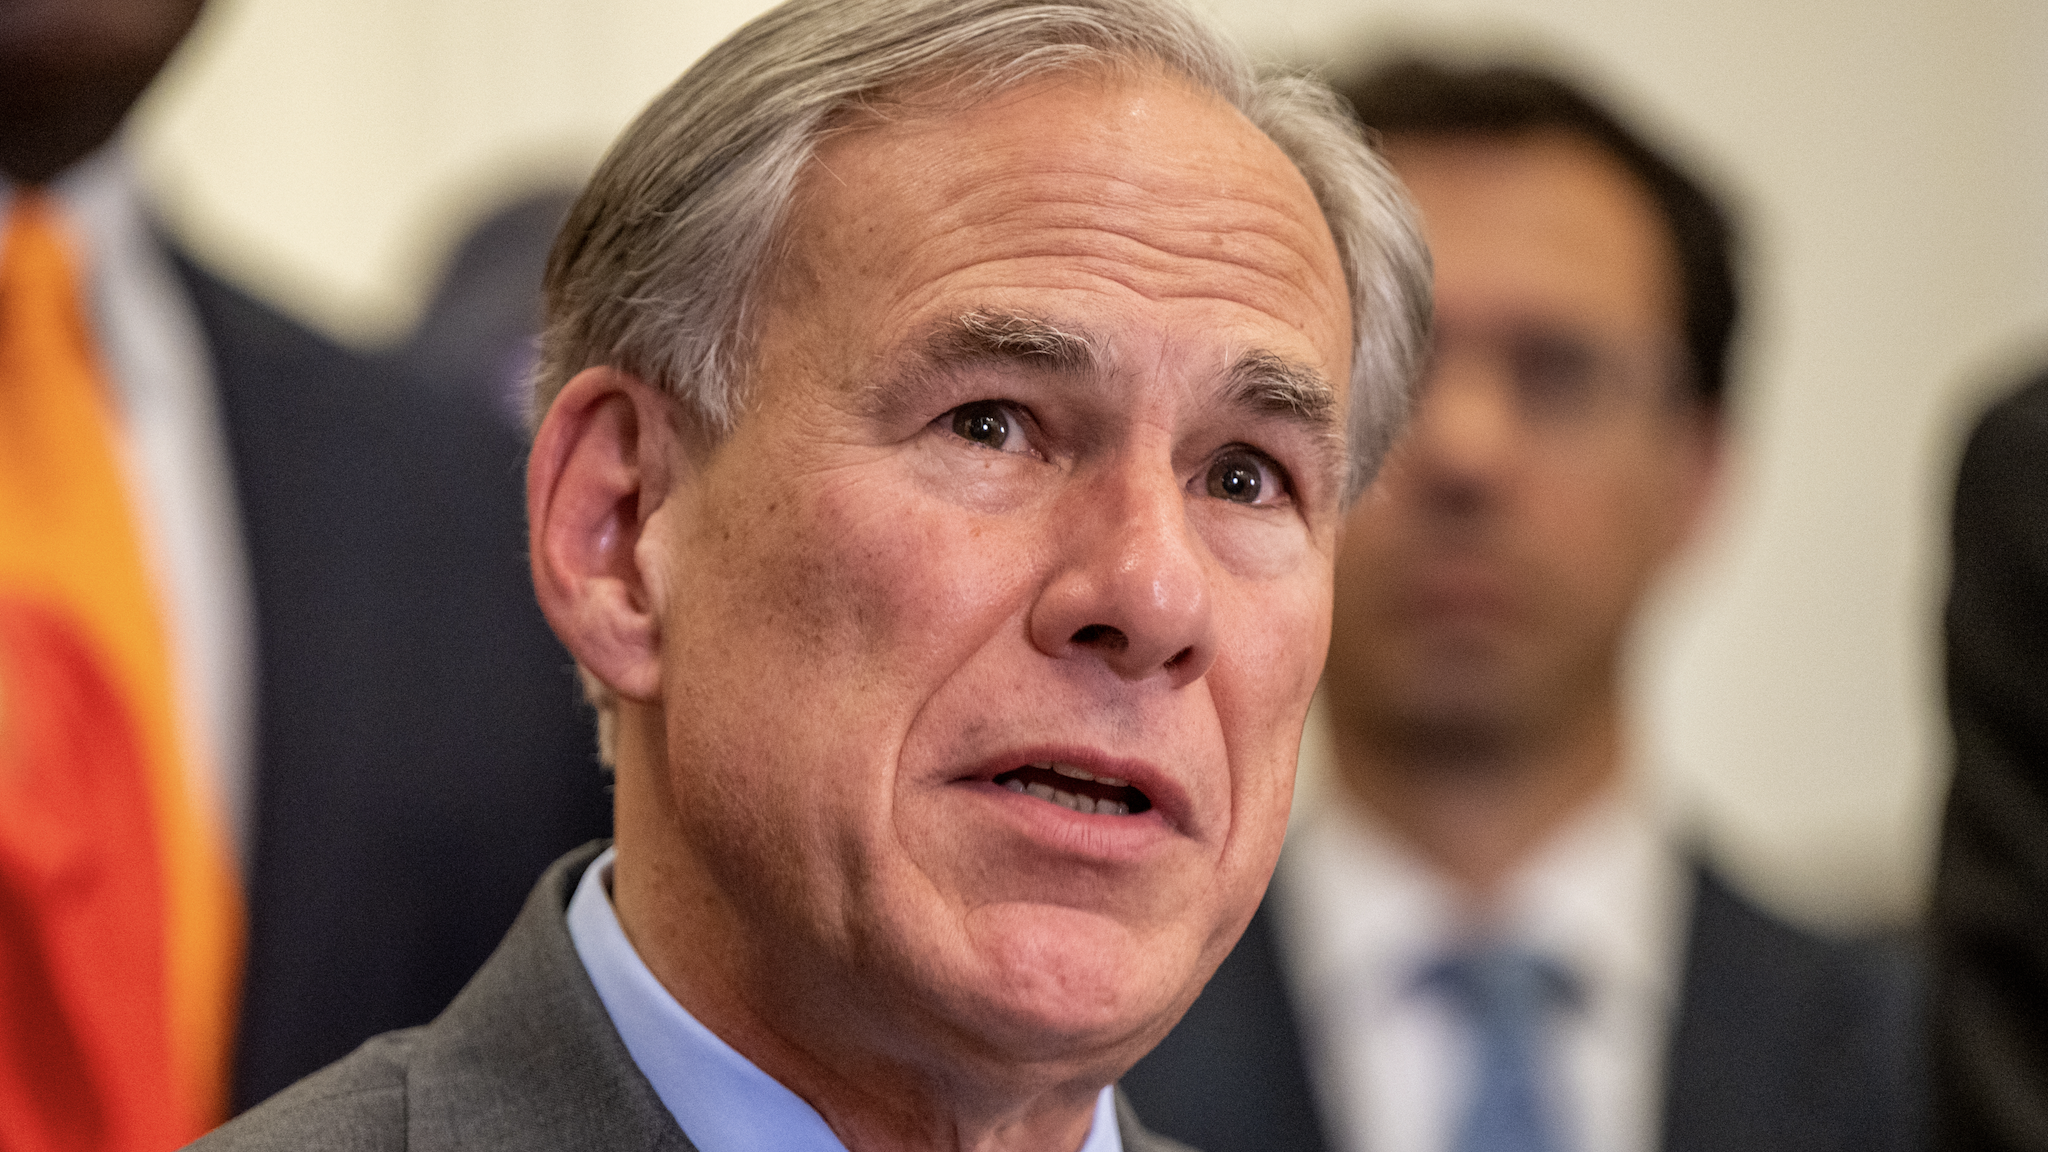 AUSTIN, TEXAS - MARCH 15: Texas Gov. Greg Abbott speaks during a news conference on March 15, 2023 in Austin, Texas. Gov. Abbott and state officials attended a news conference where they discussed the proposed Texas Helpful Incentives to Produce Semiconductors (CHIPS) Act legislation.